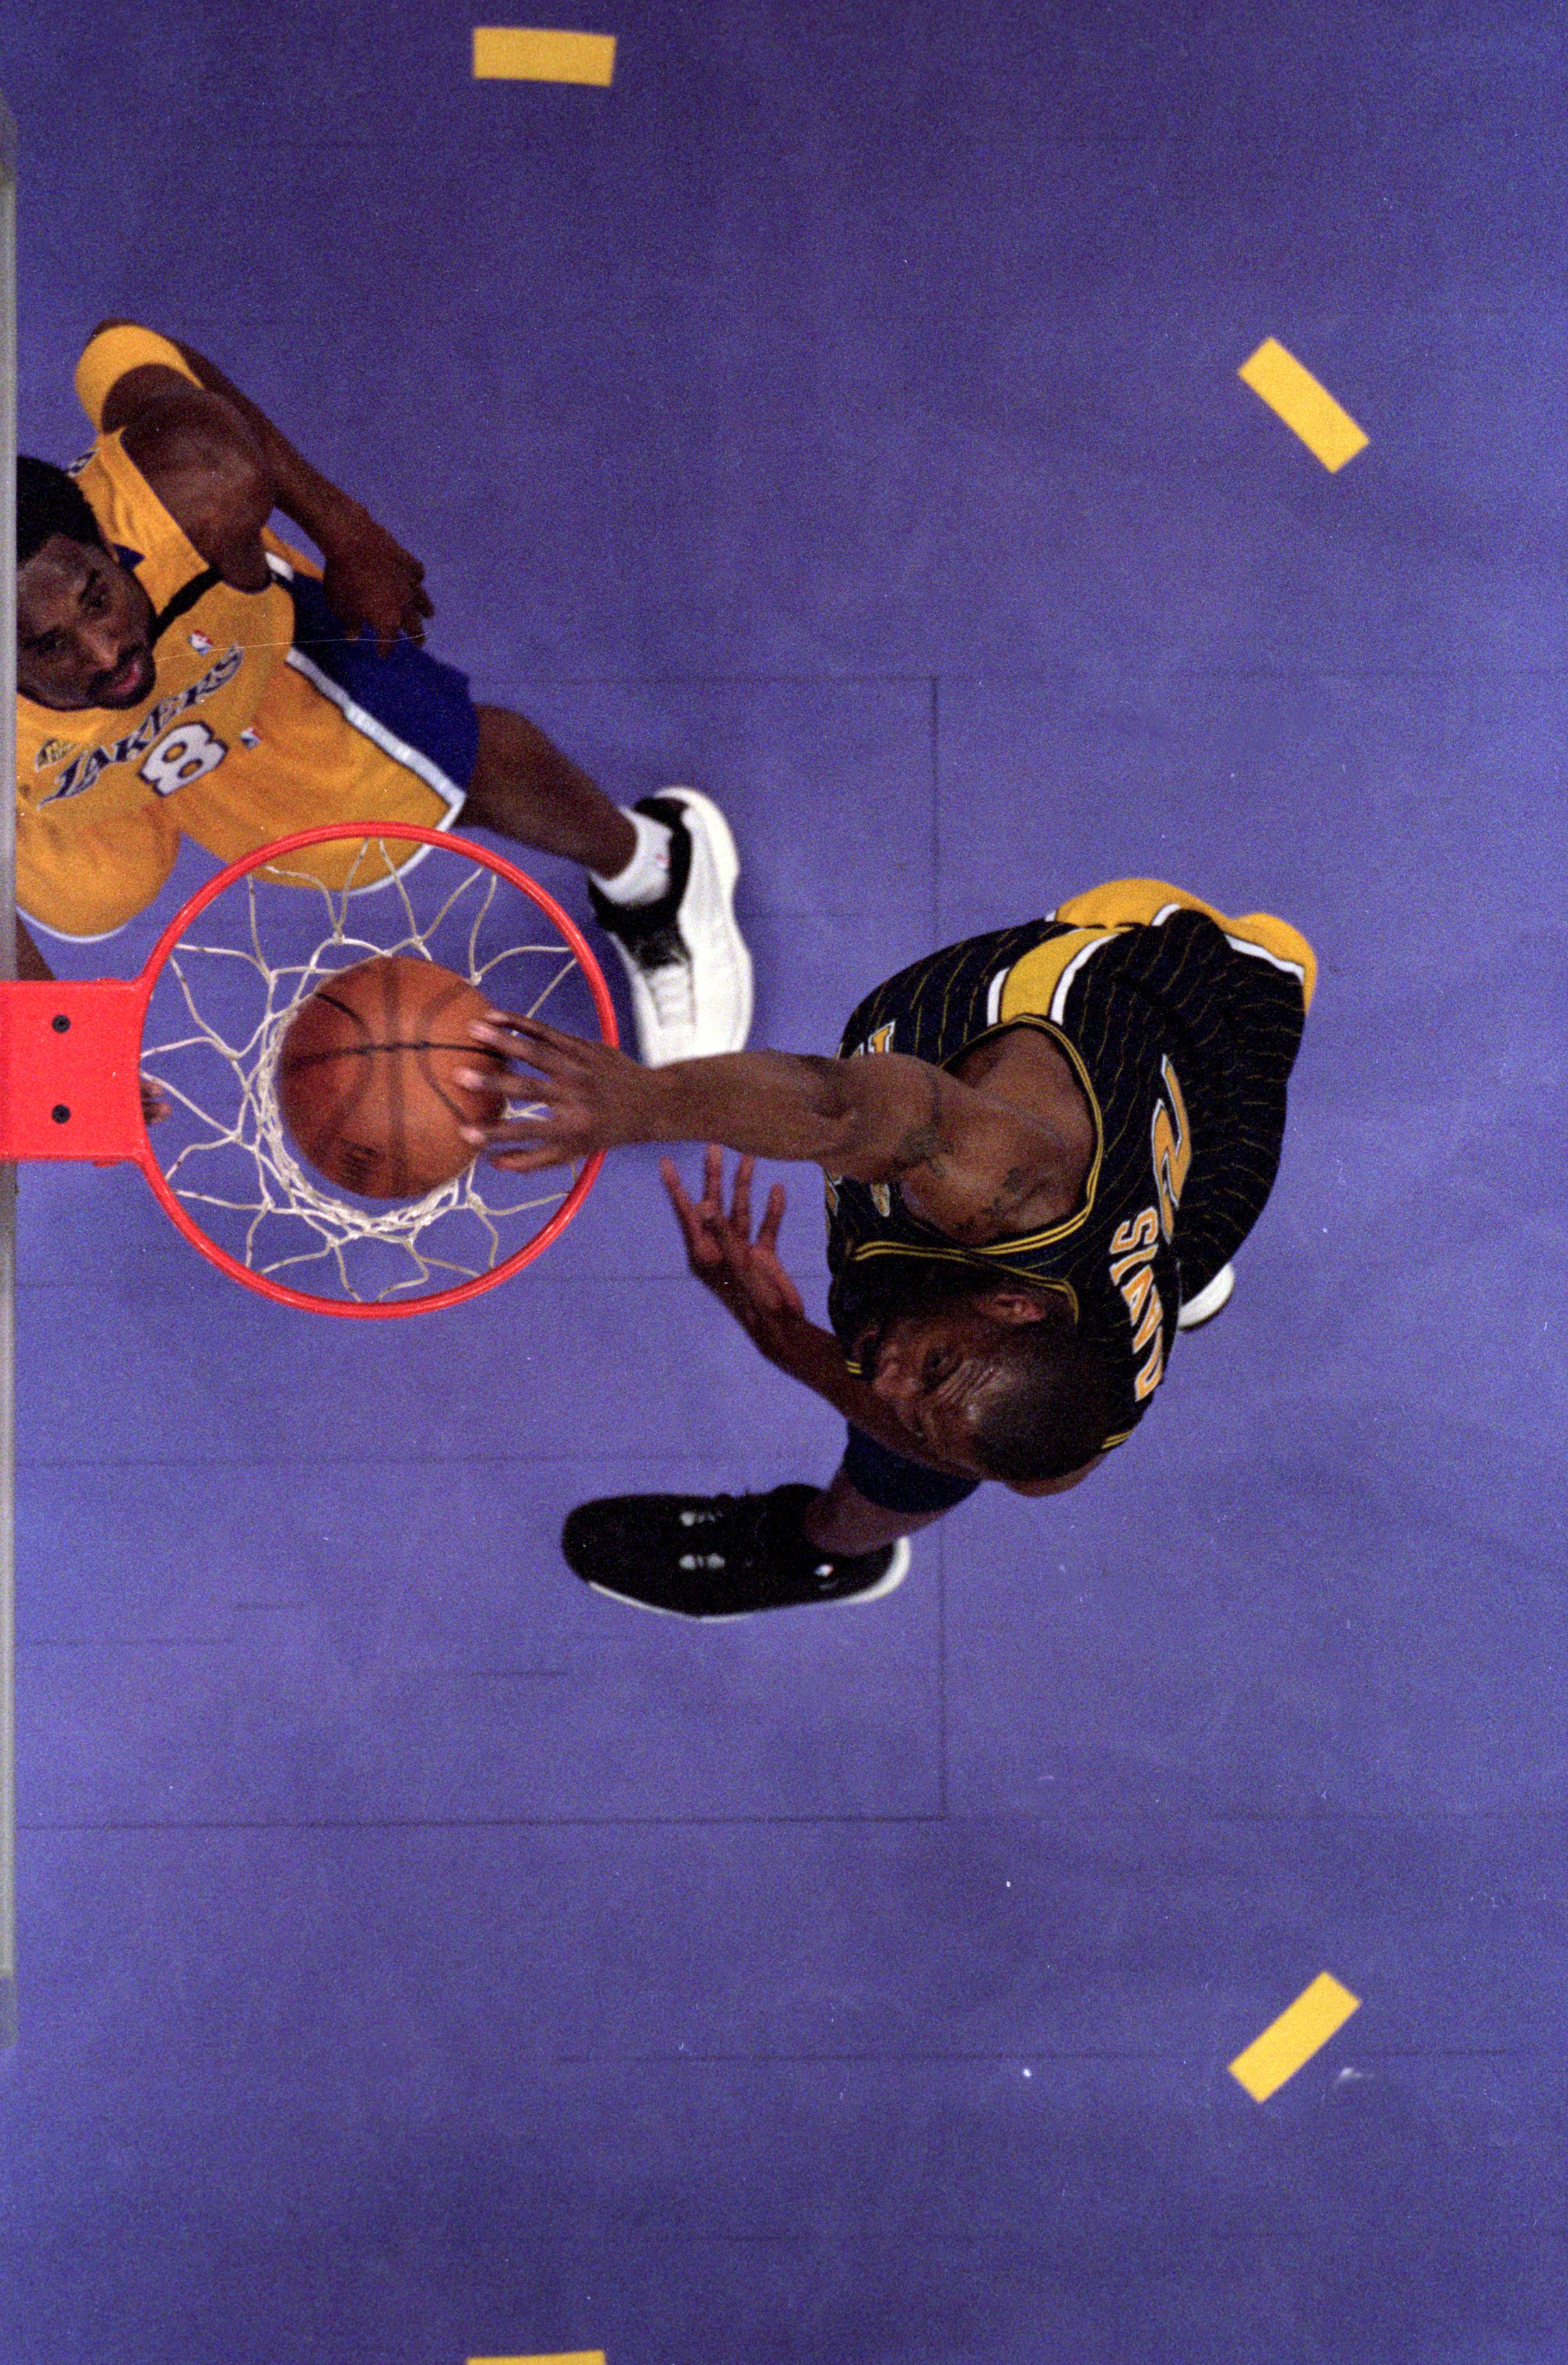 19 Jun 2000: An over head view of Dale Davis #32 of the Indiana Pacers making a slam dunk as he is guarded by Kobe Bryant #8 of the Los Angeles Lakers during the NBA Finals Game 6 at the Staples Center in Los Angeles, California.  The Lakers defeated the 